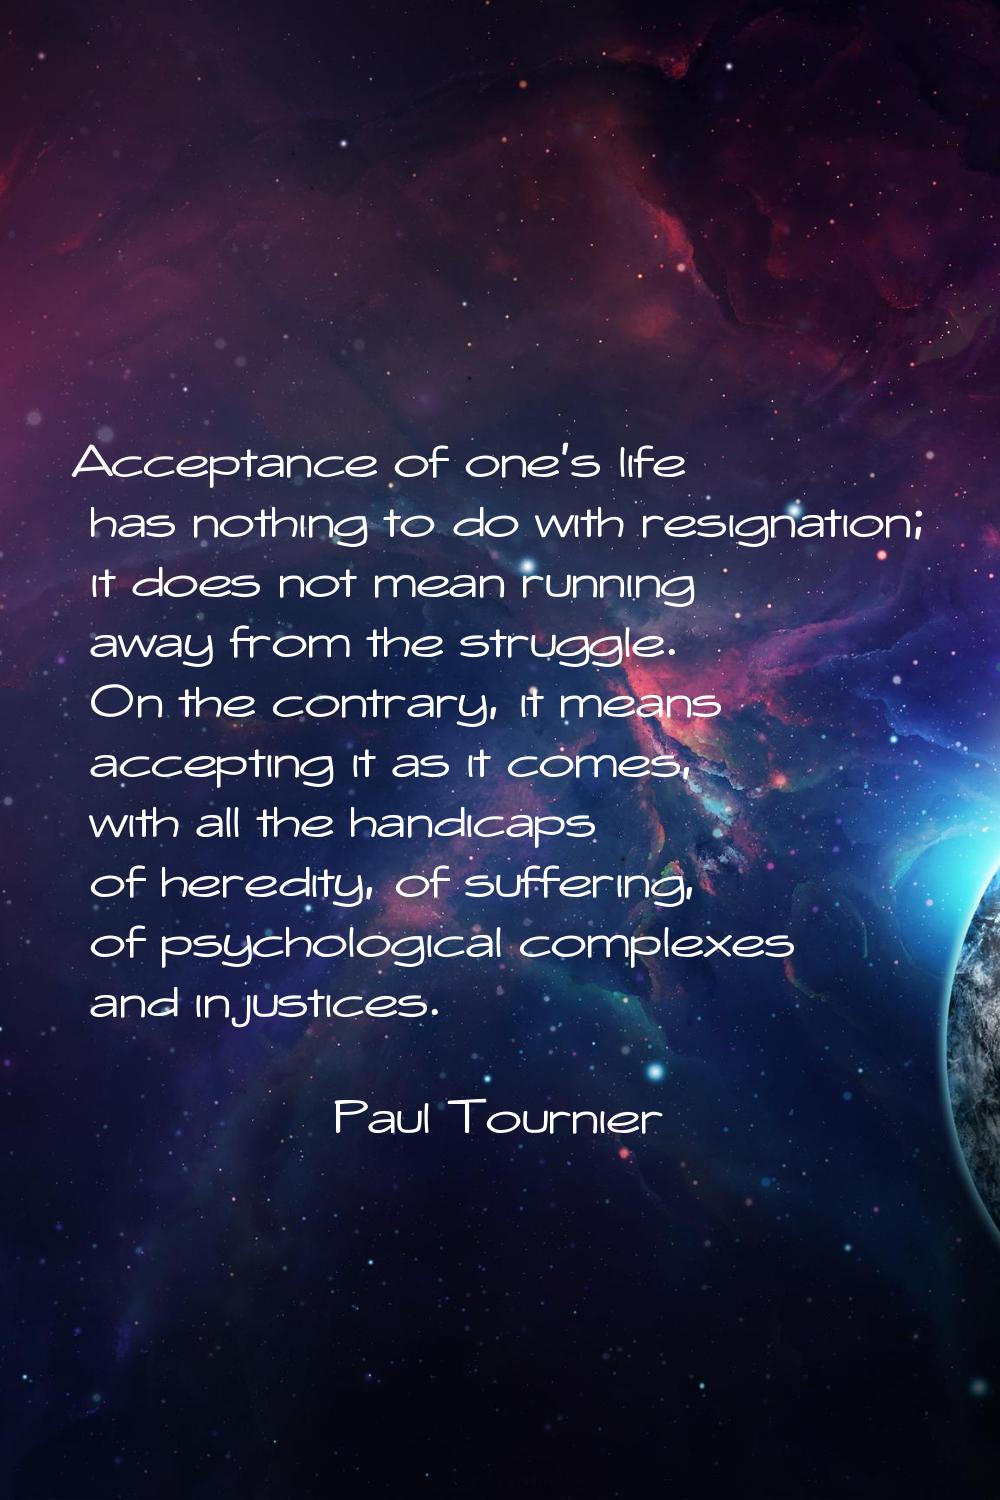 Acceptance of one's life has nothing to do with resignation; it does not mean running away from the